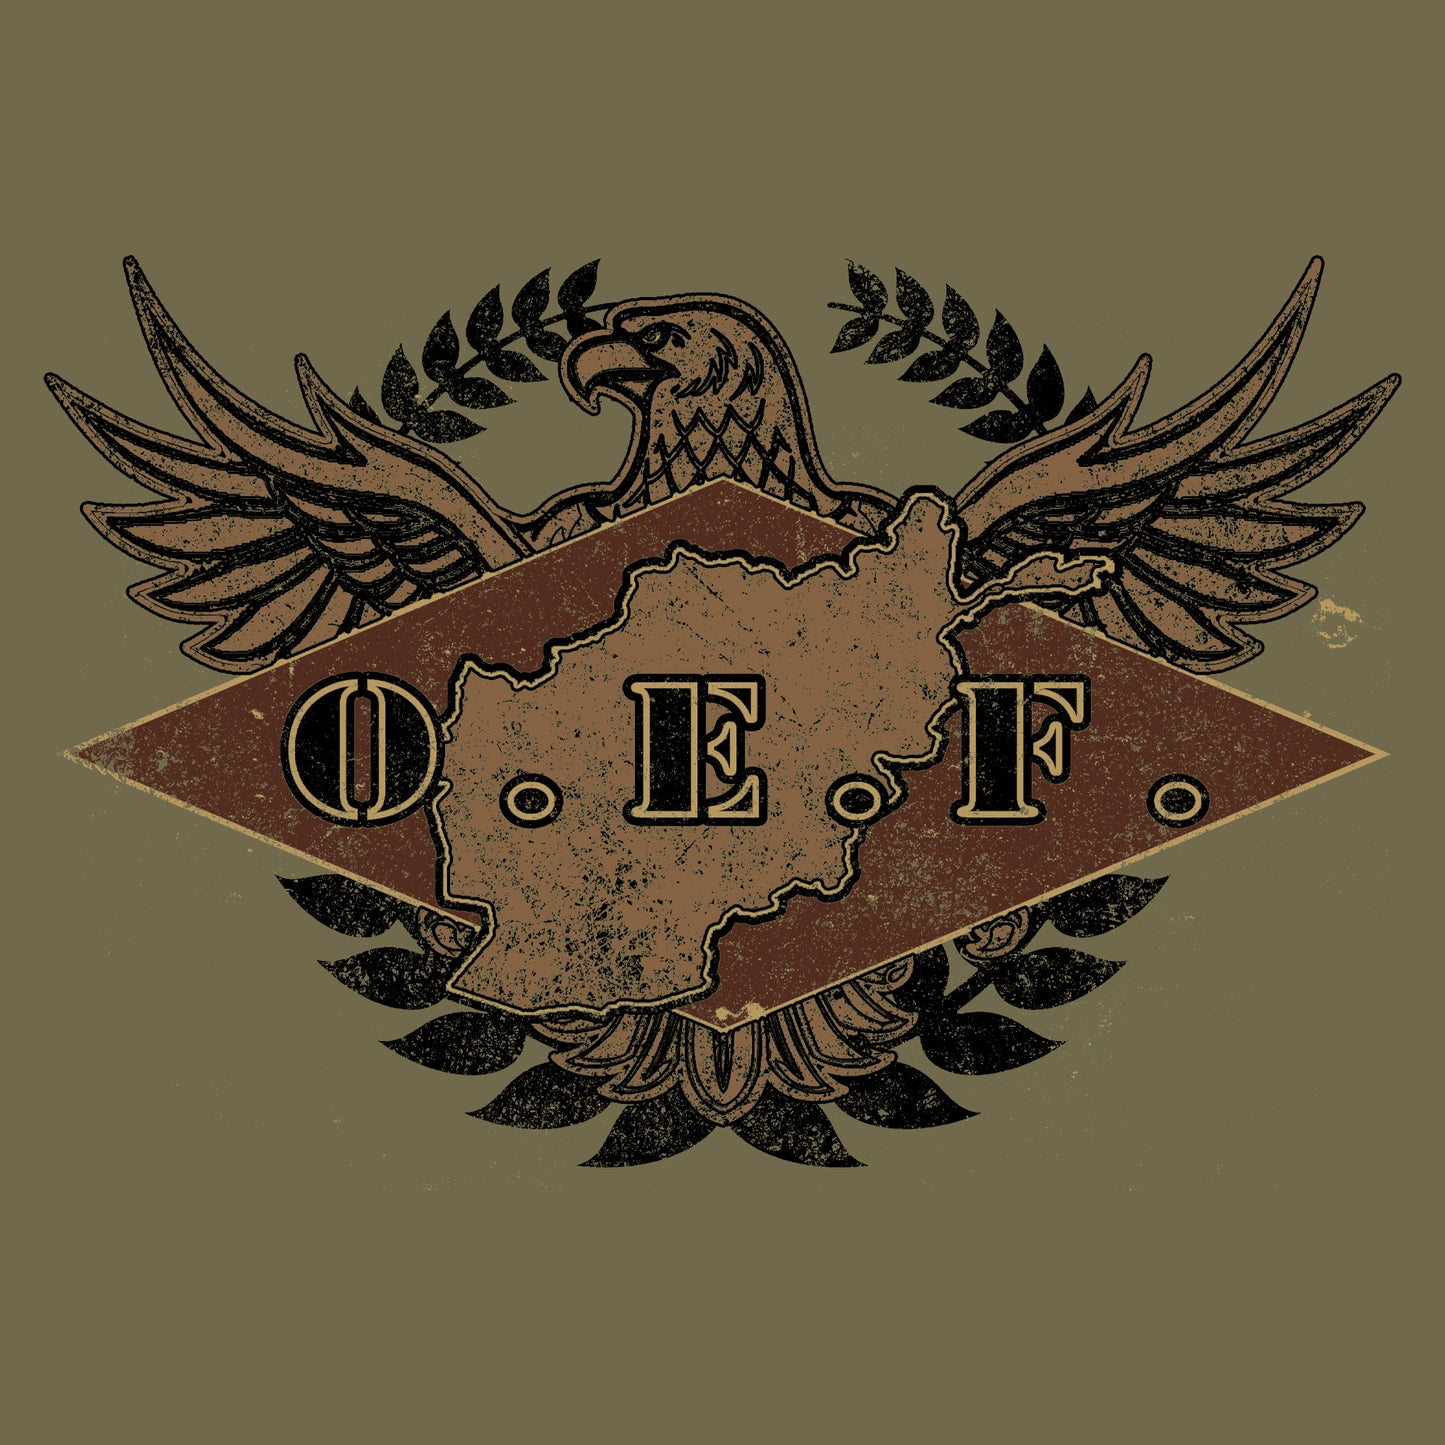 OEF Men's Military Shirts 